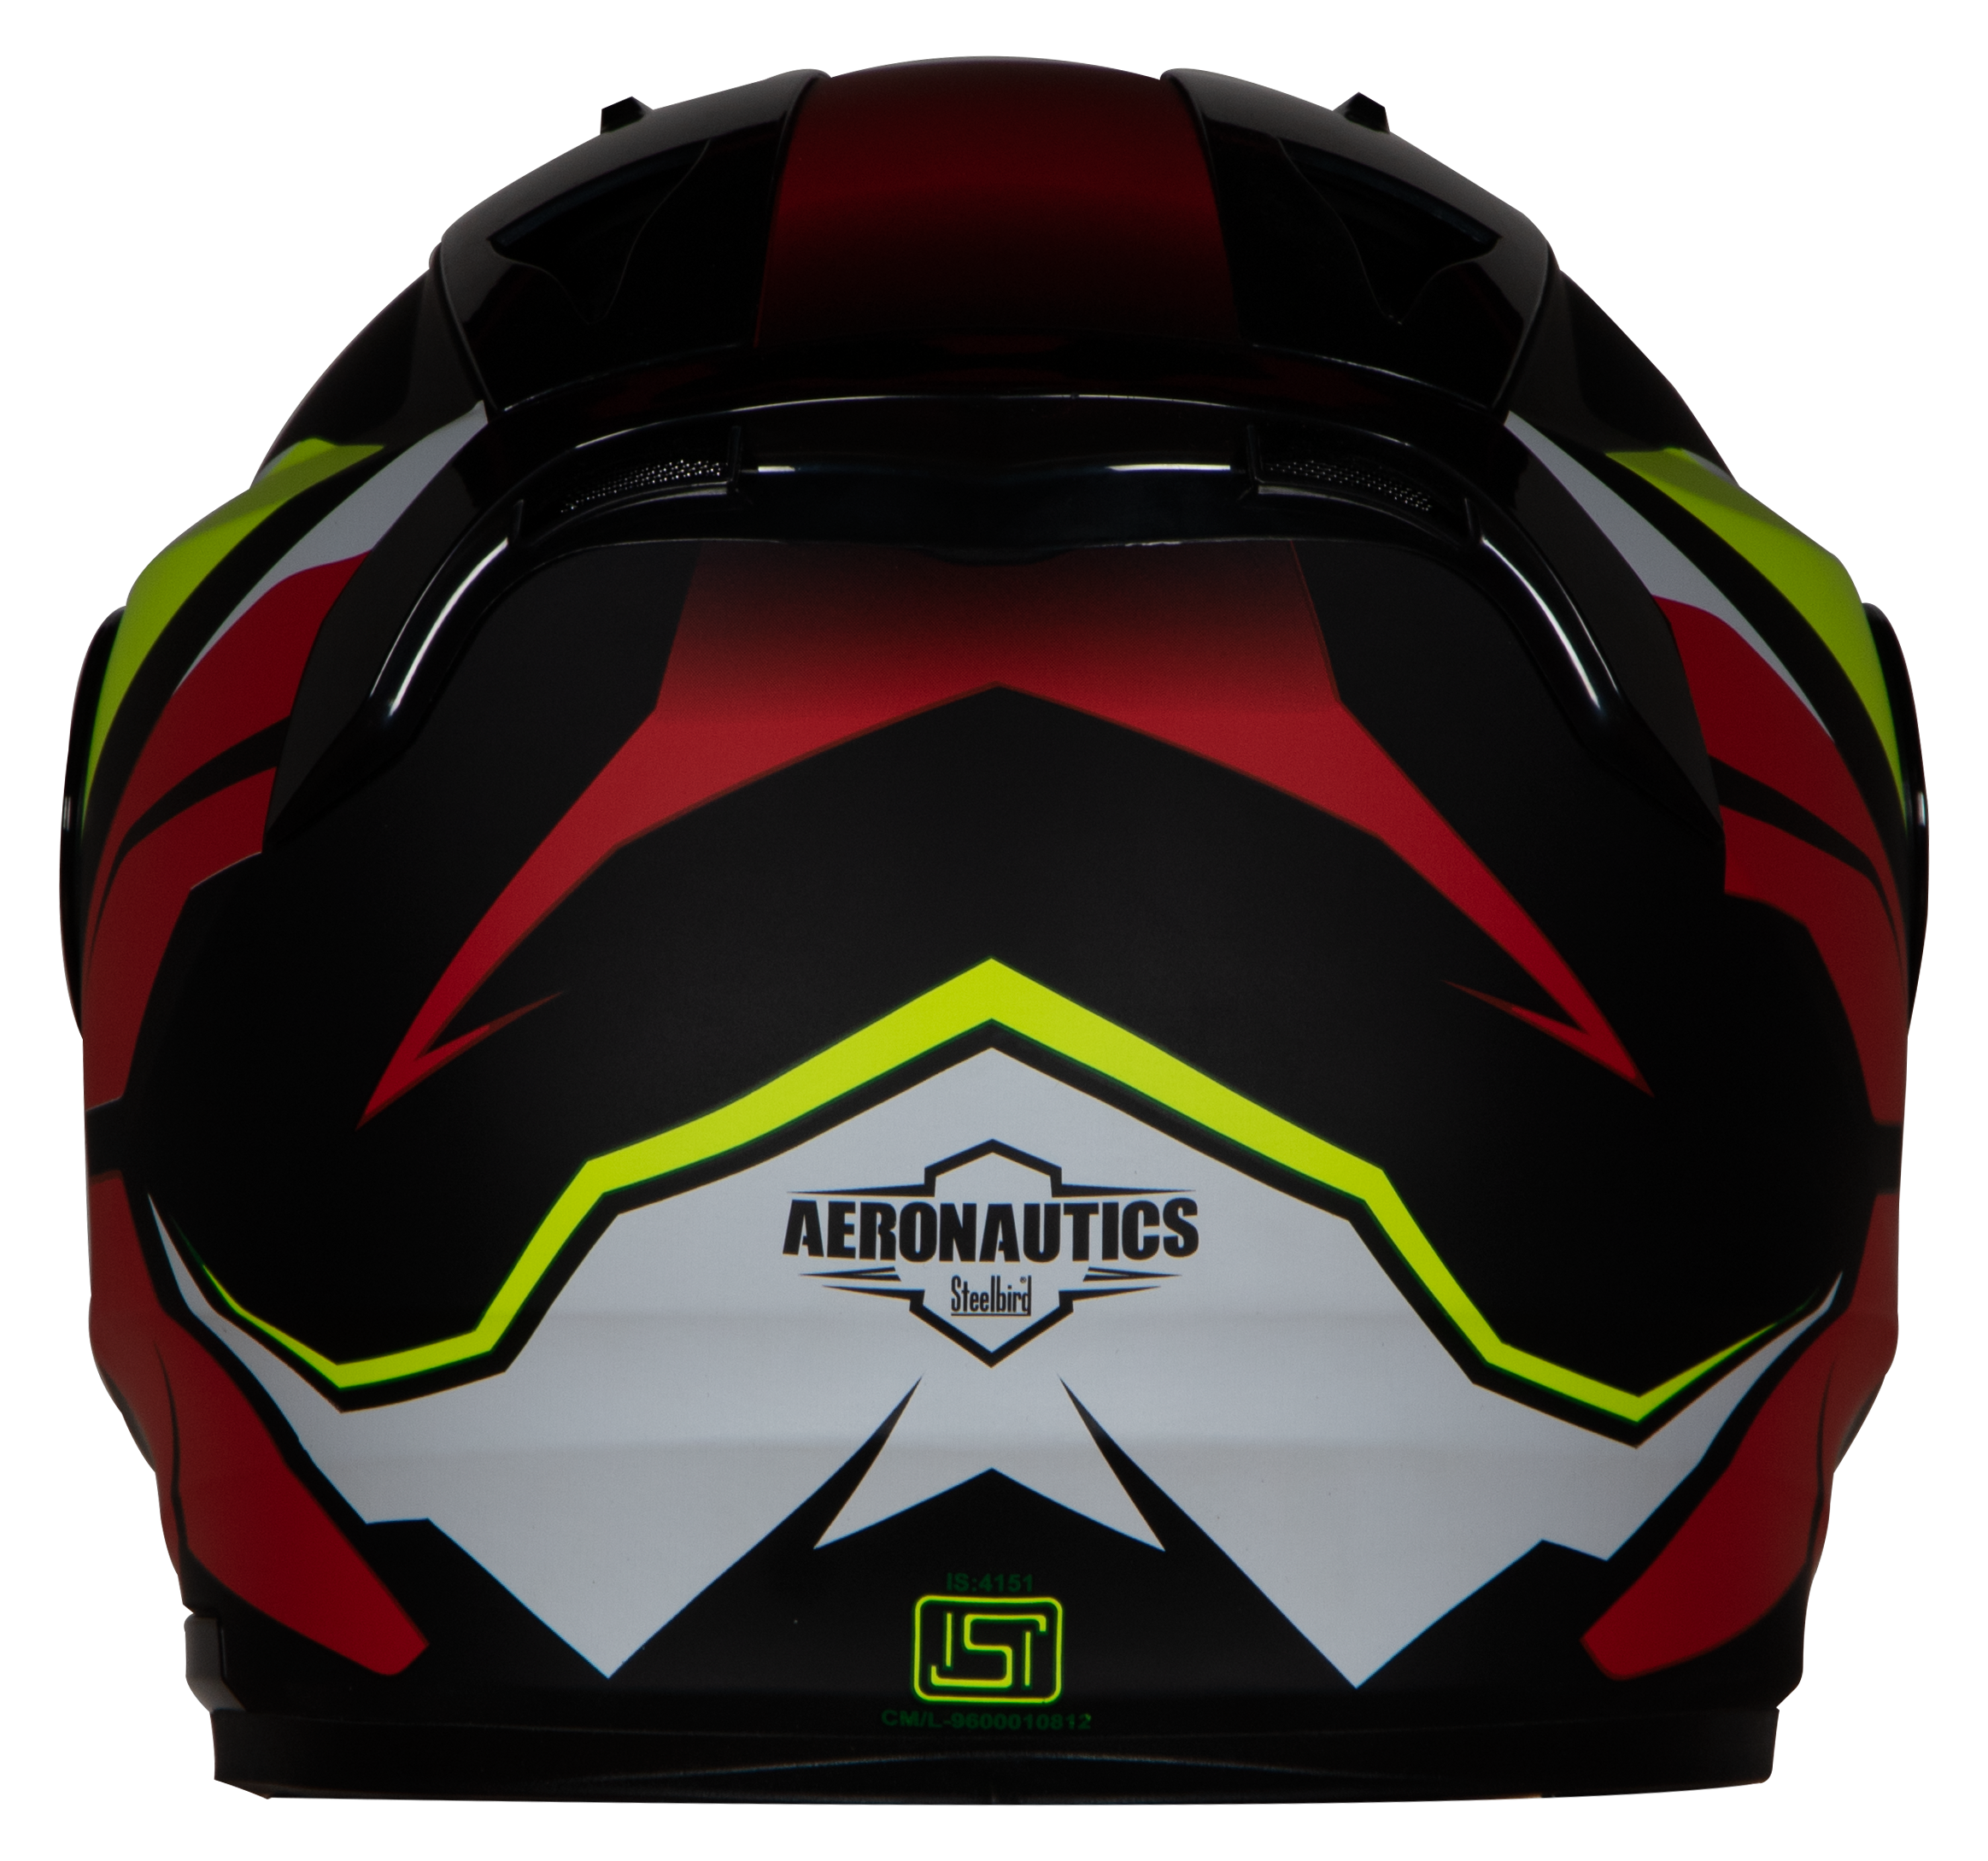 SA-1 Aviate Mat Black With Red(Fitted With Clear Visor Extra Green Night Vision Visor Free)